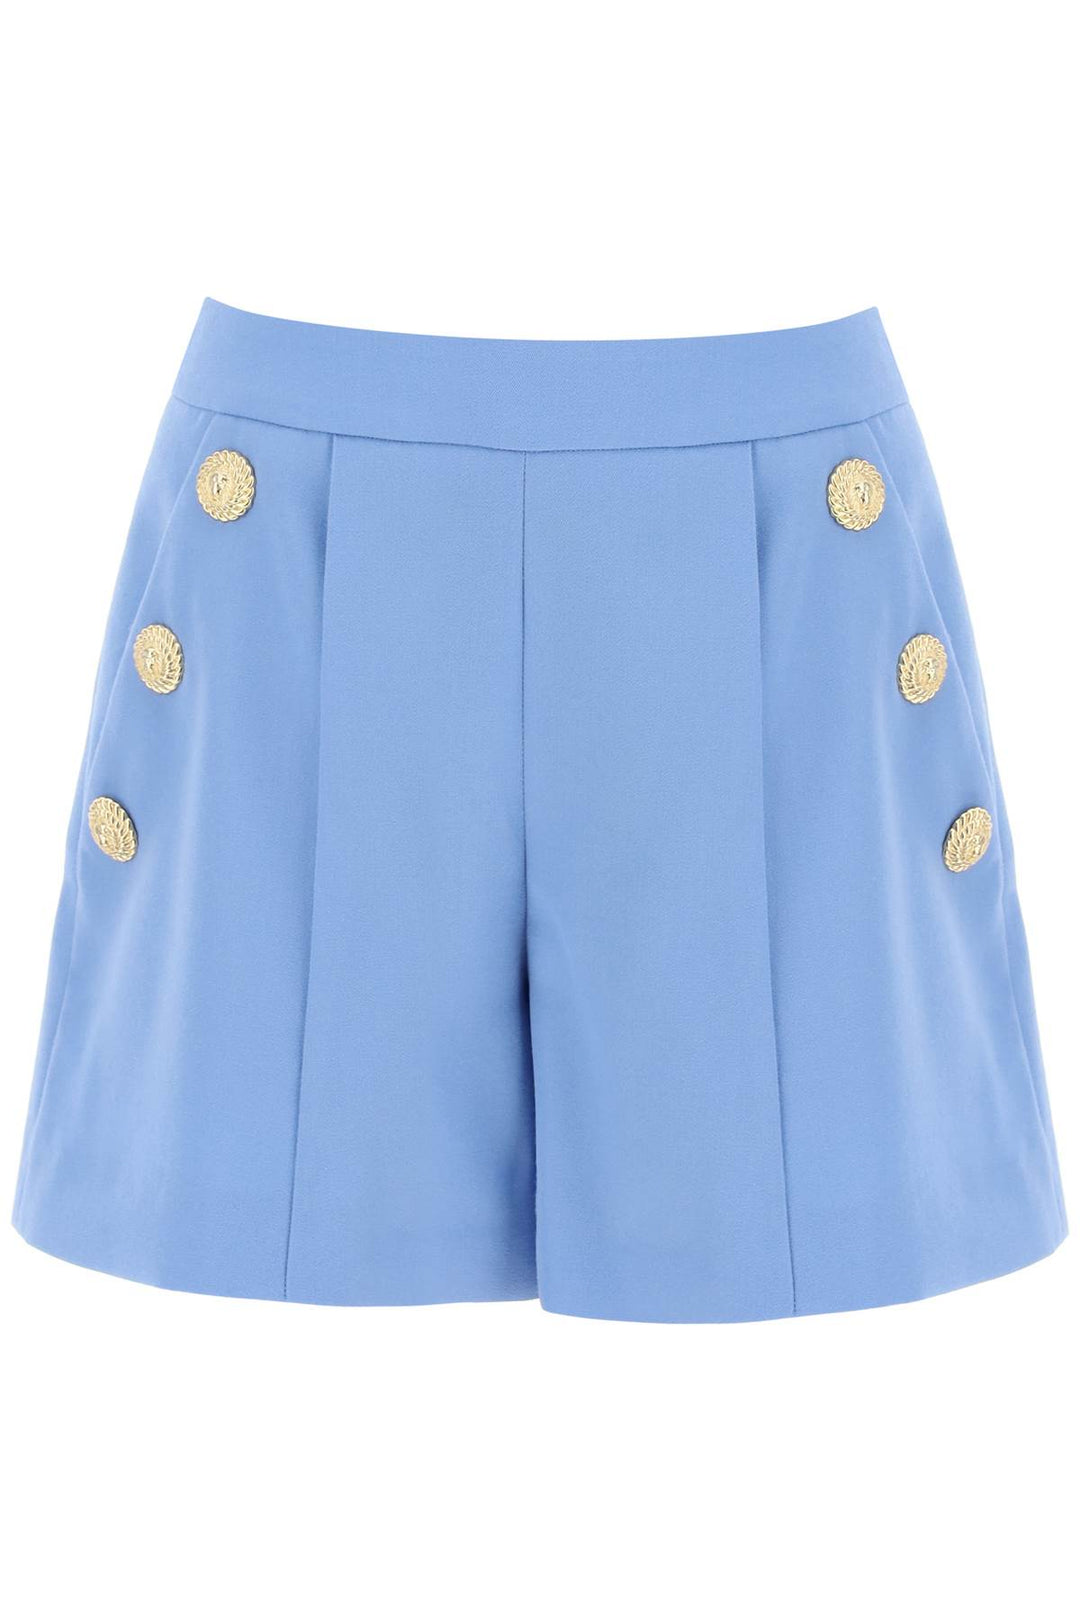 Balmain Embossed Button Shorts With   Celeste